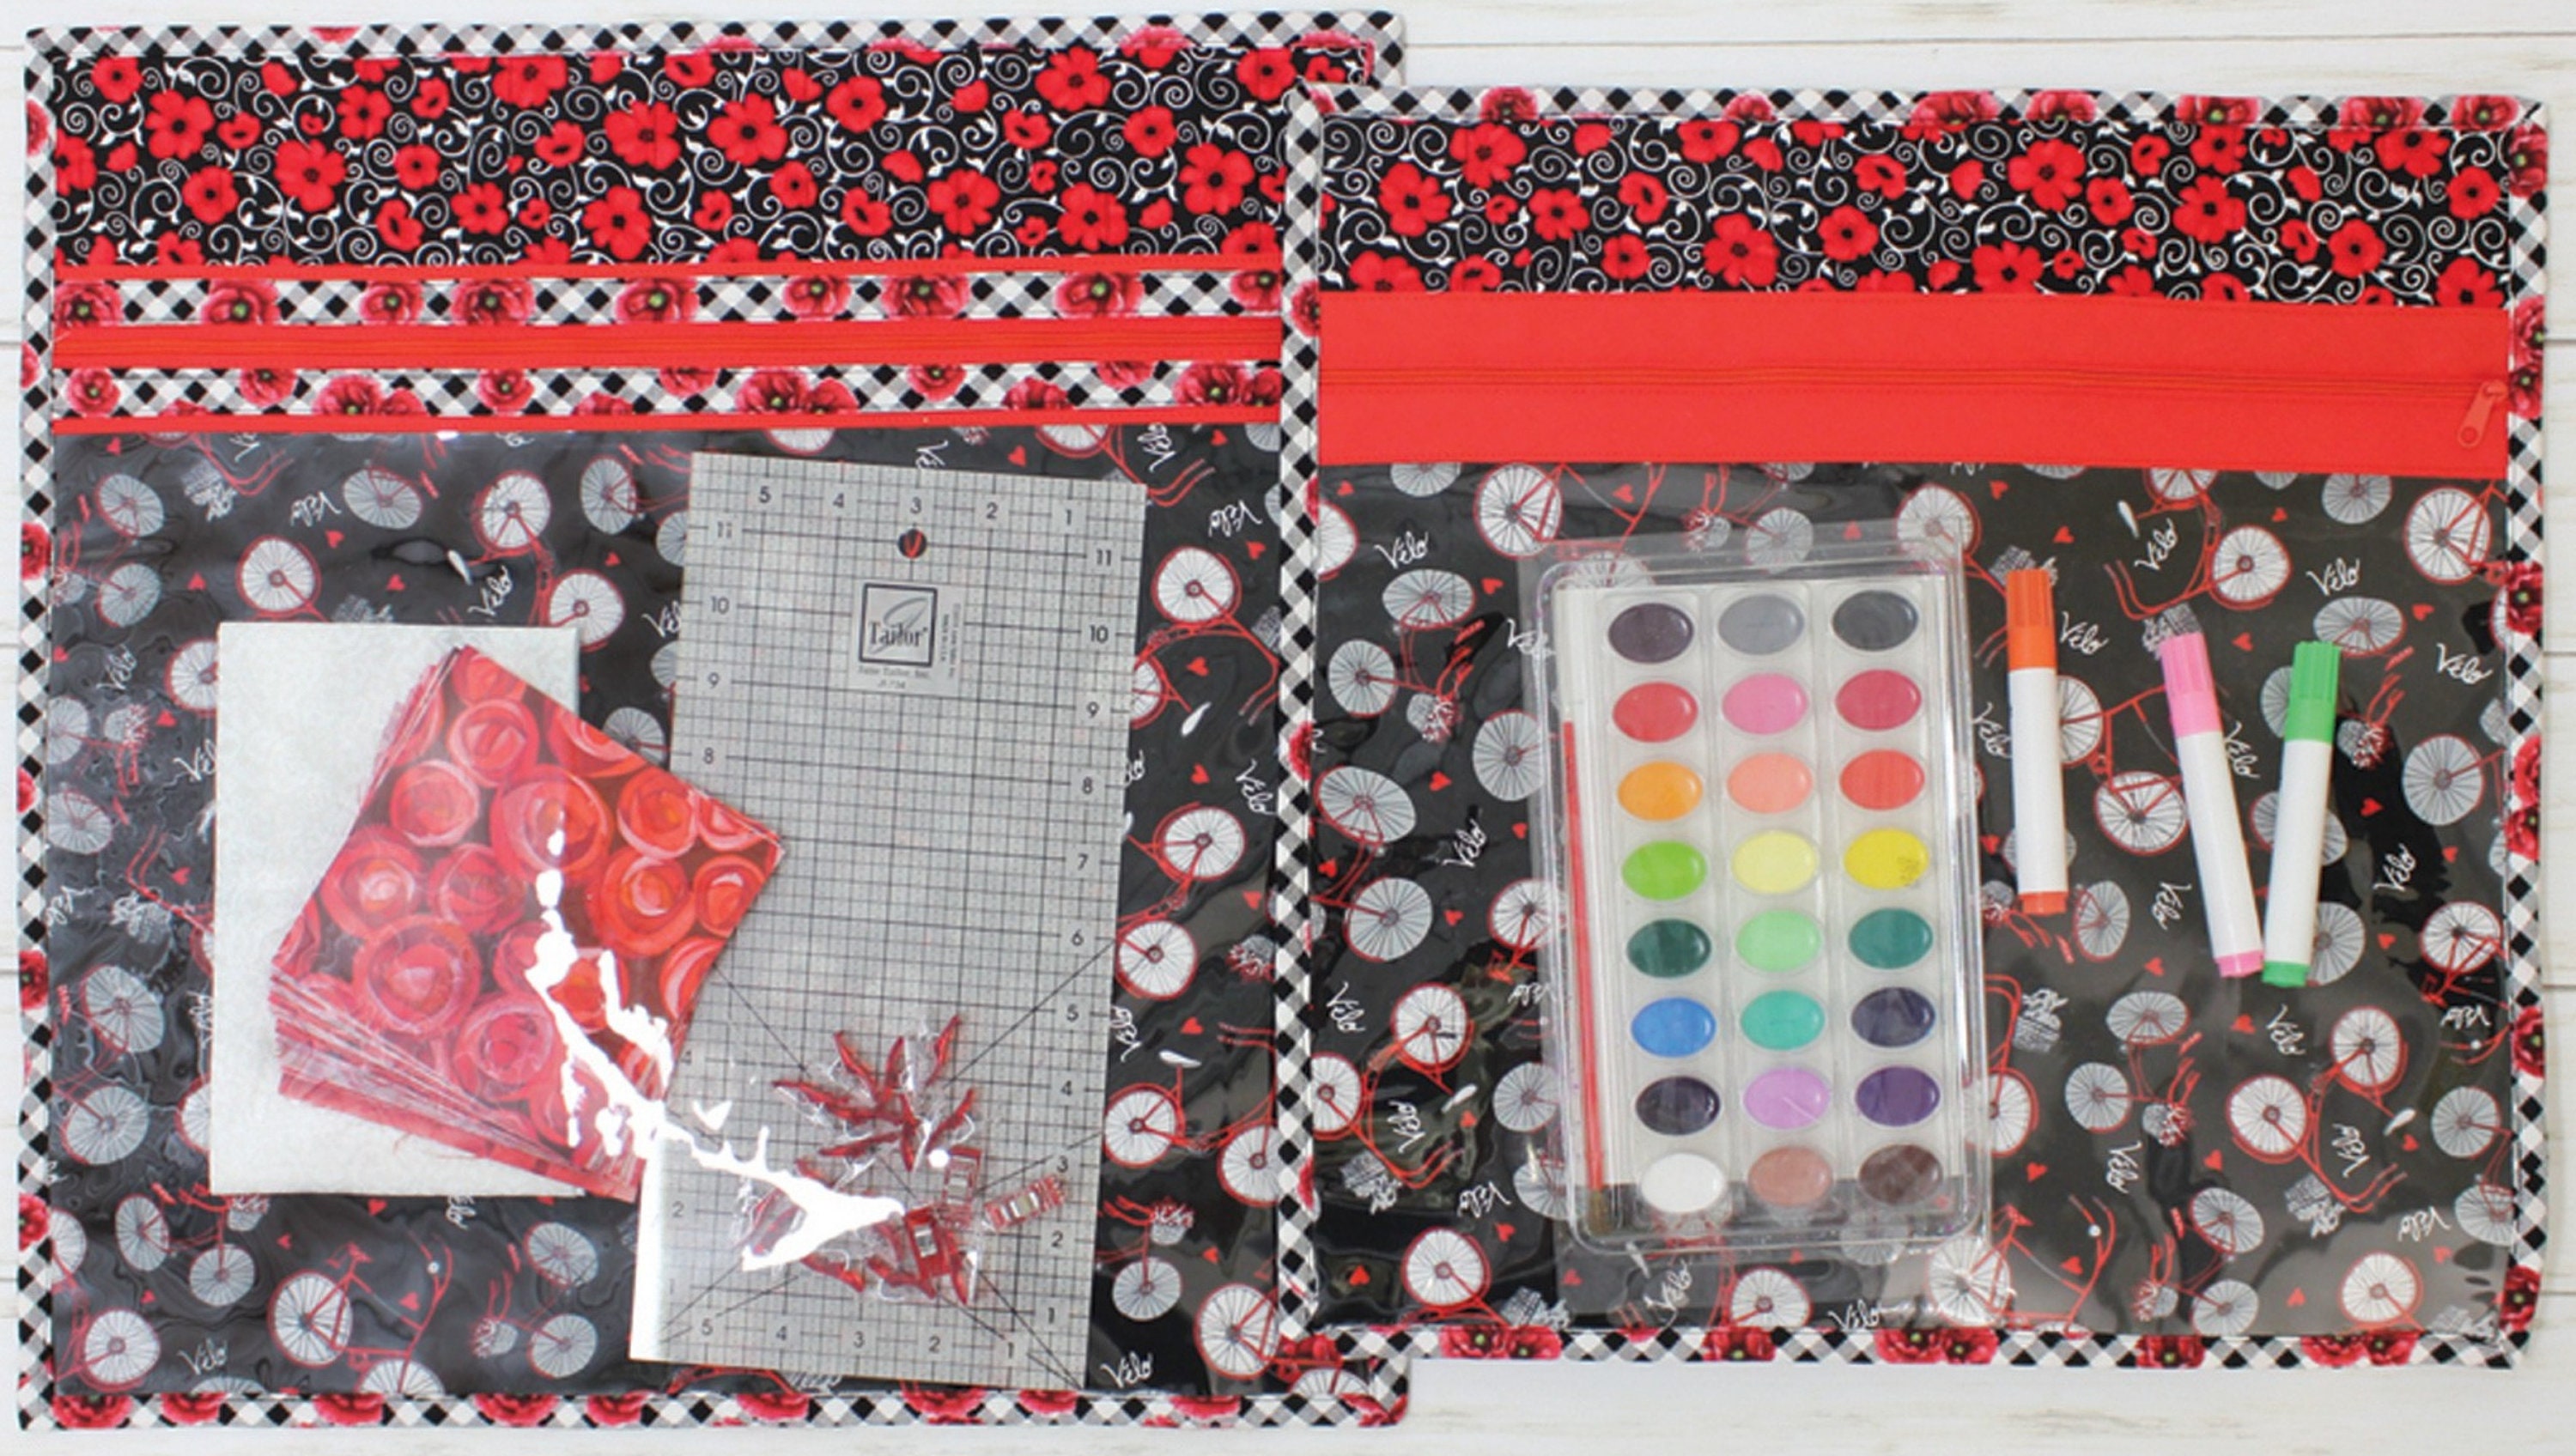 June Tailor Quilt As You Go 2 Project Bags - 730976016681